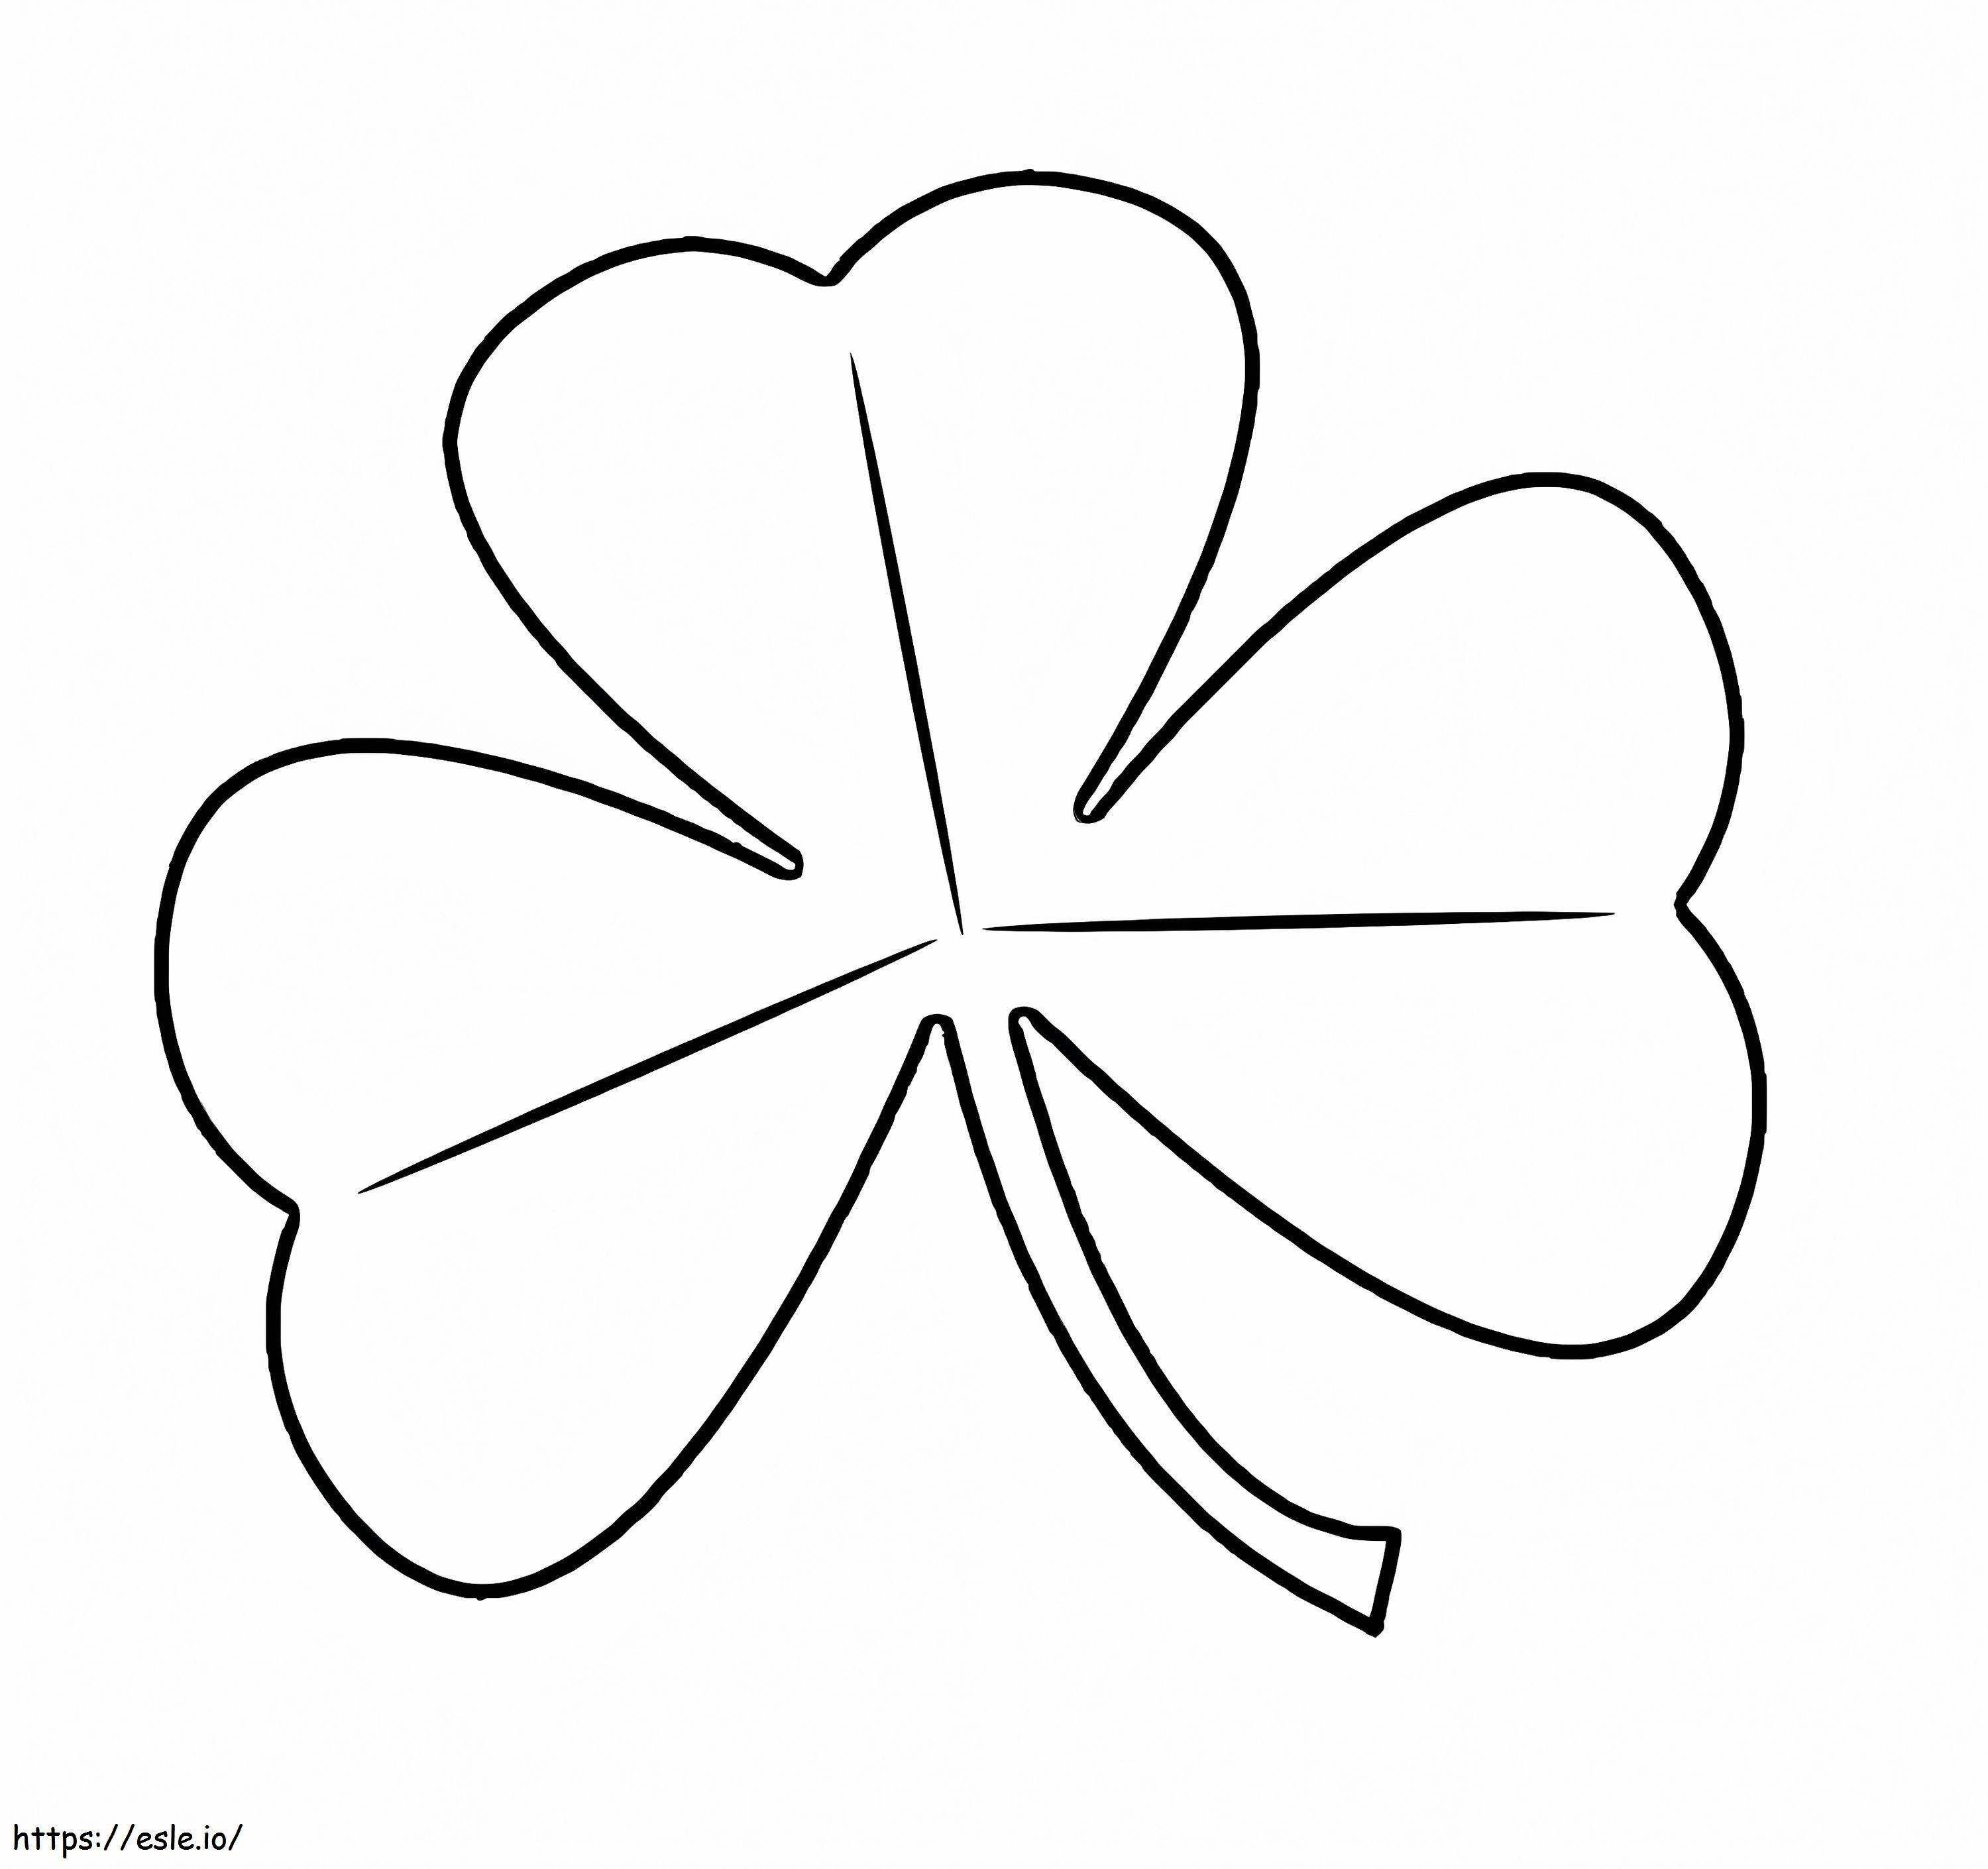 Very Easy Shamrock coloring page